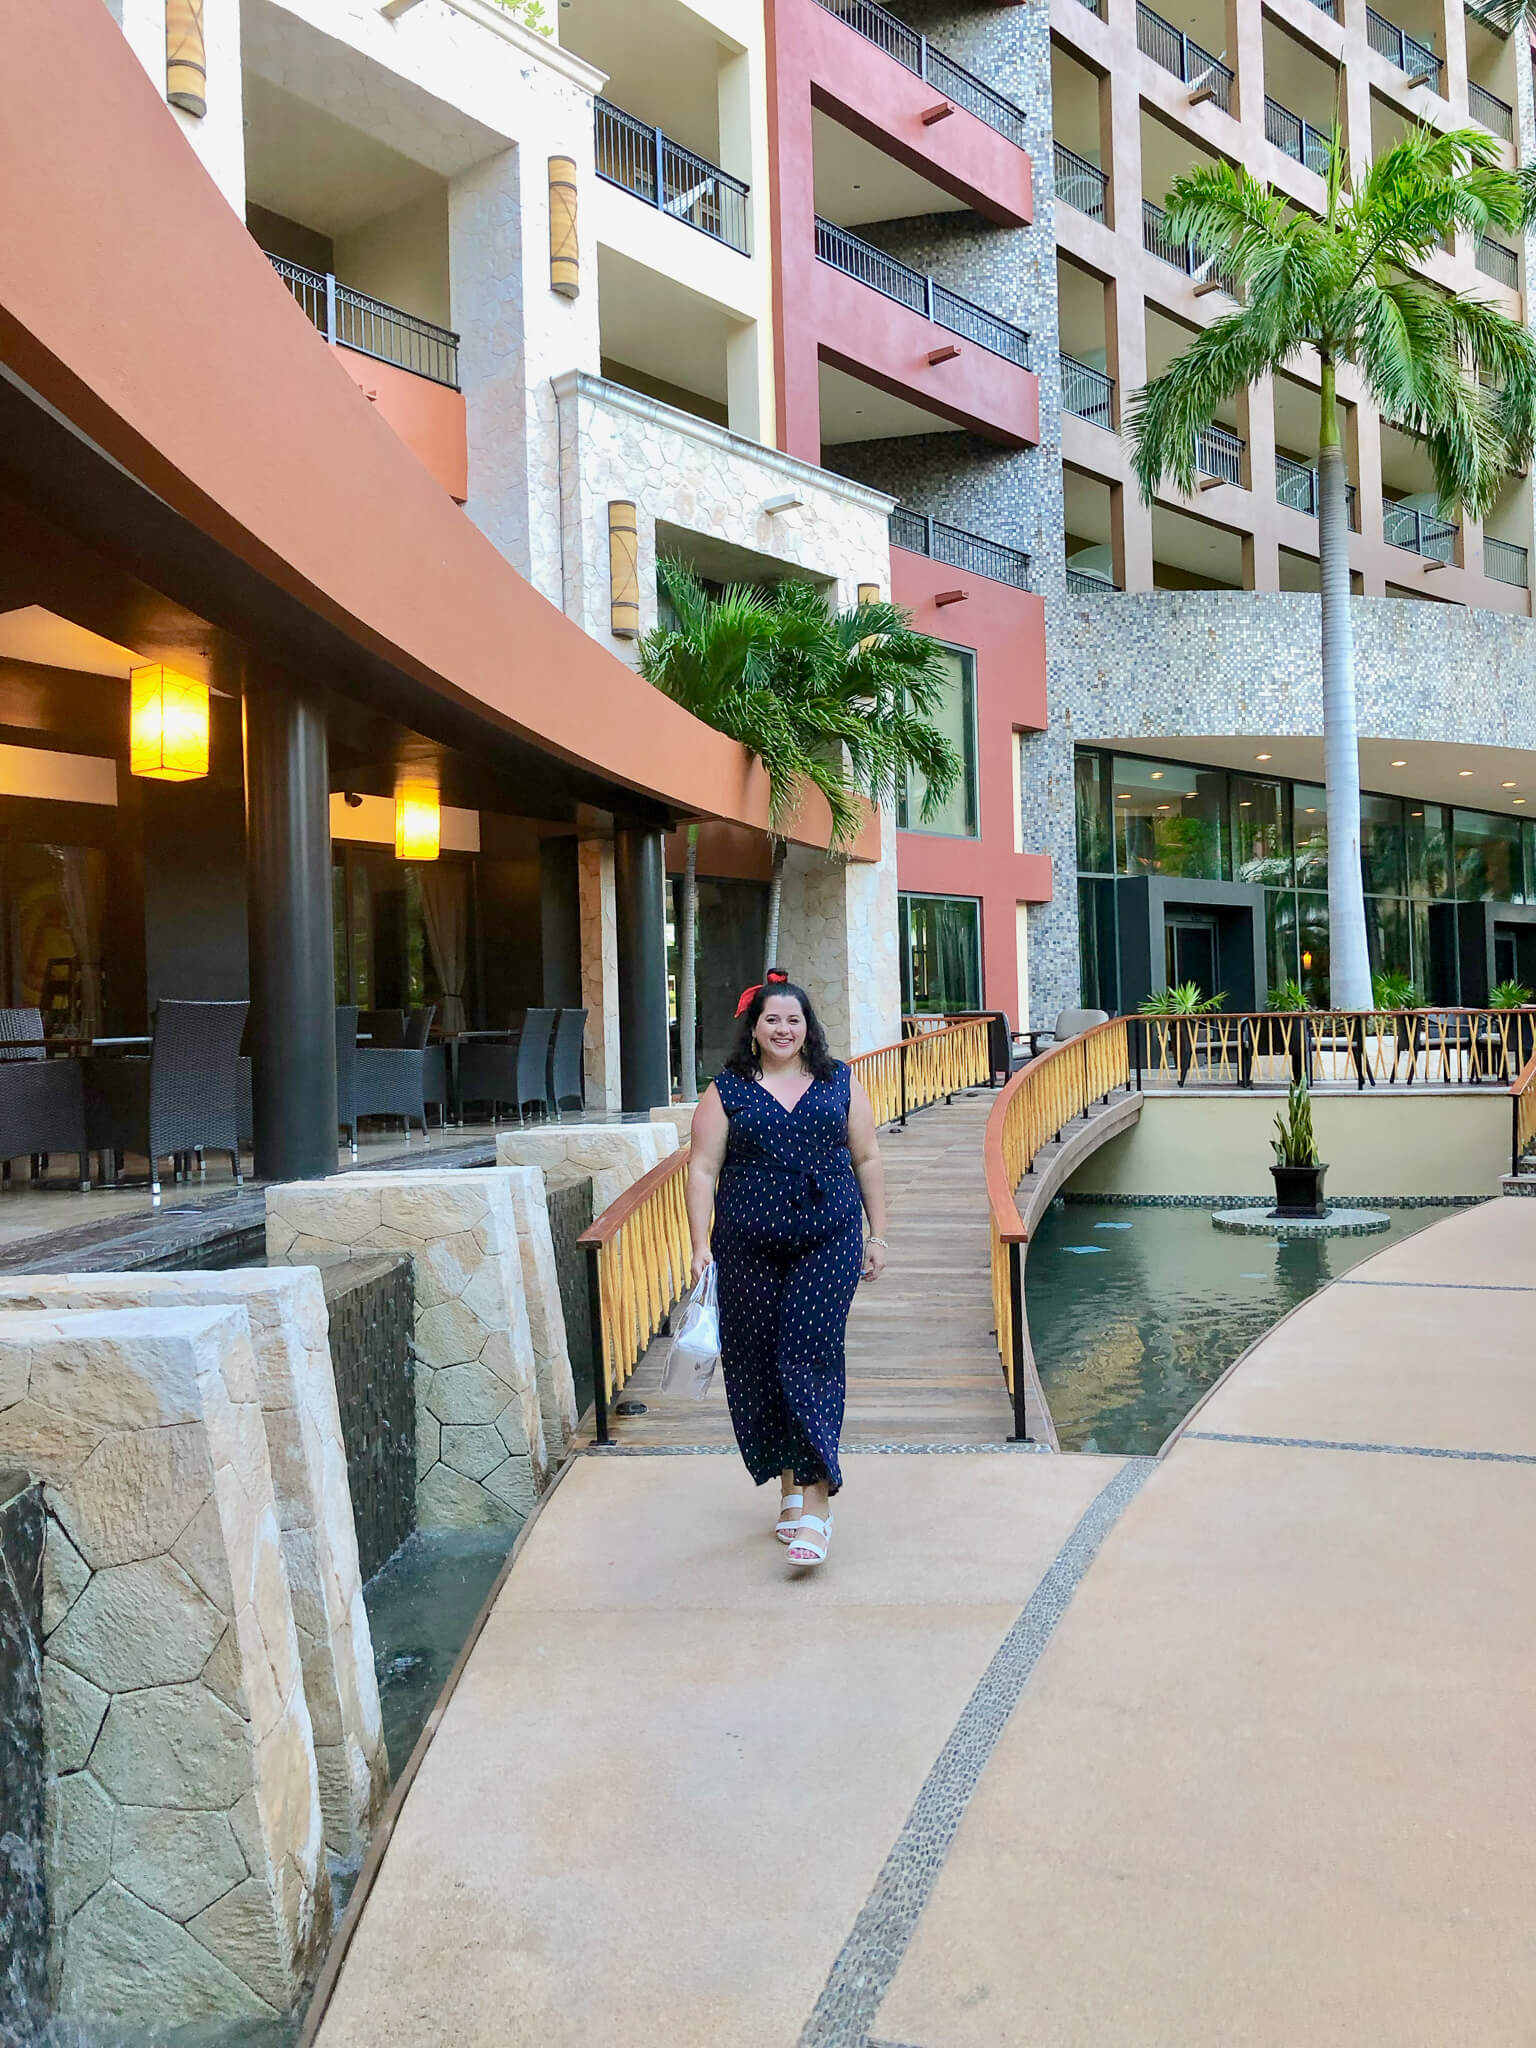 An honest review of the Villa del Palmar Cancun including whether or not you should do the All Inclusive or A la Carte meal packages